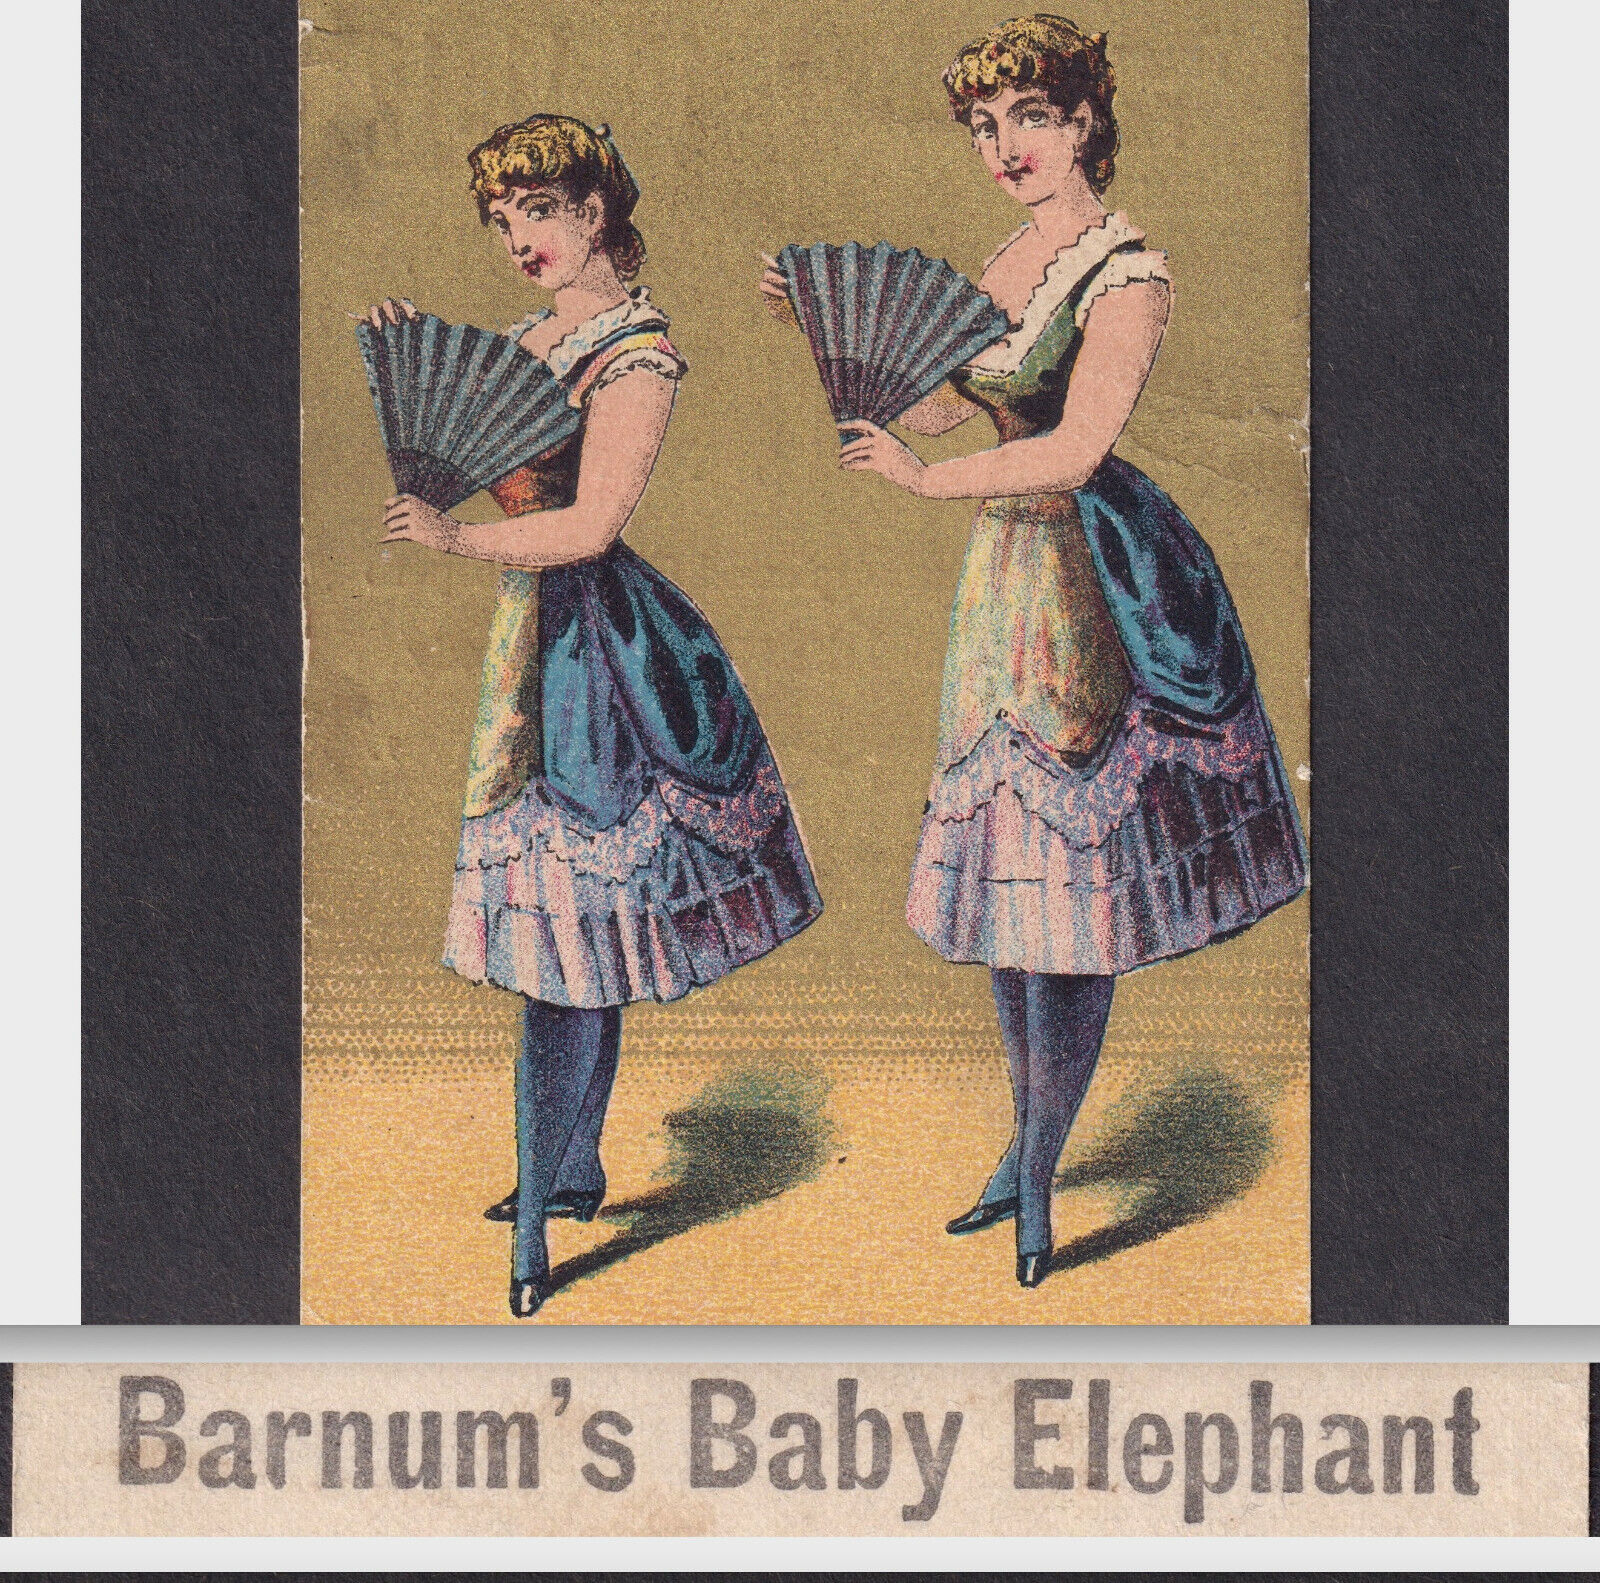 Barnum Circus Baby Elephant Goldie & Steel Comedy Grand Opera House Trade Card